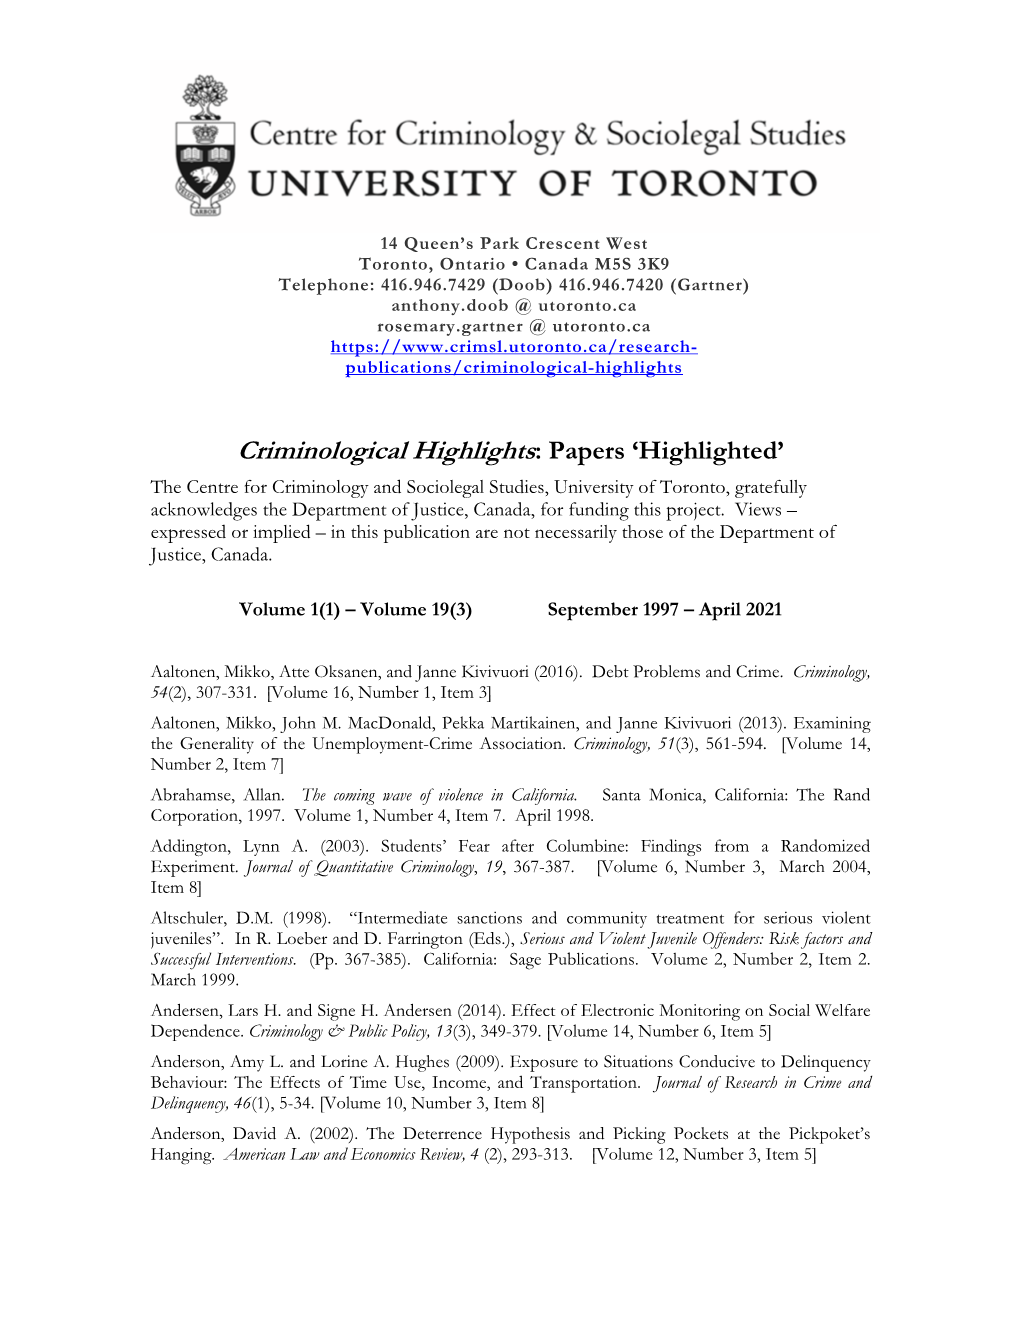 Criminological Highlights: Papers